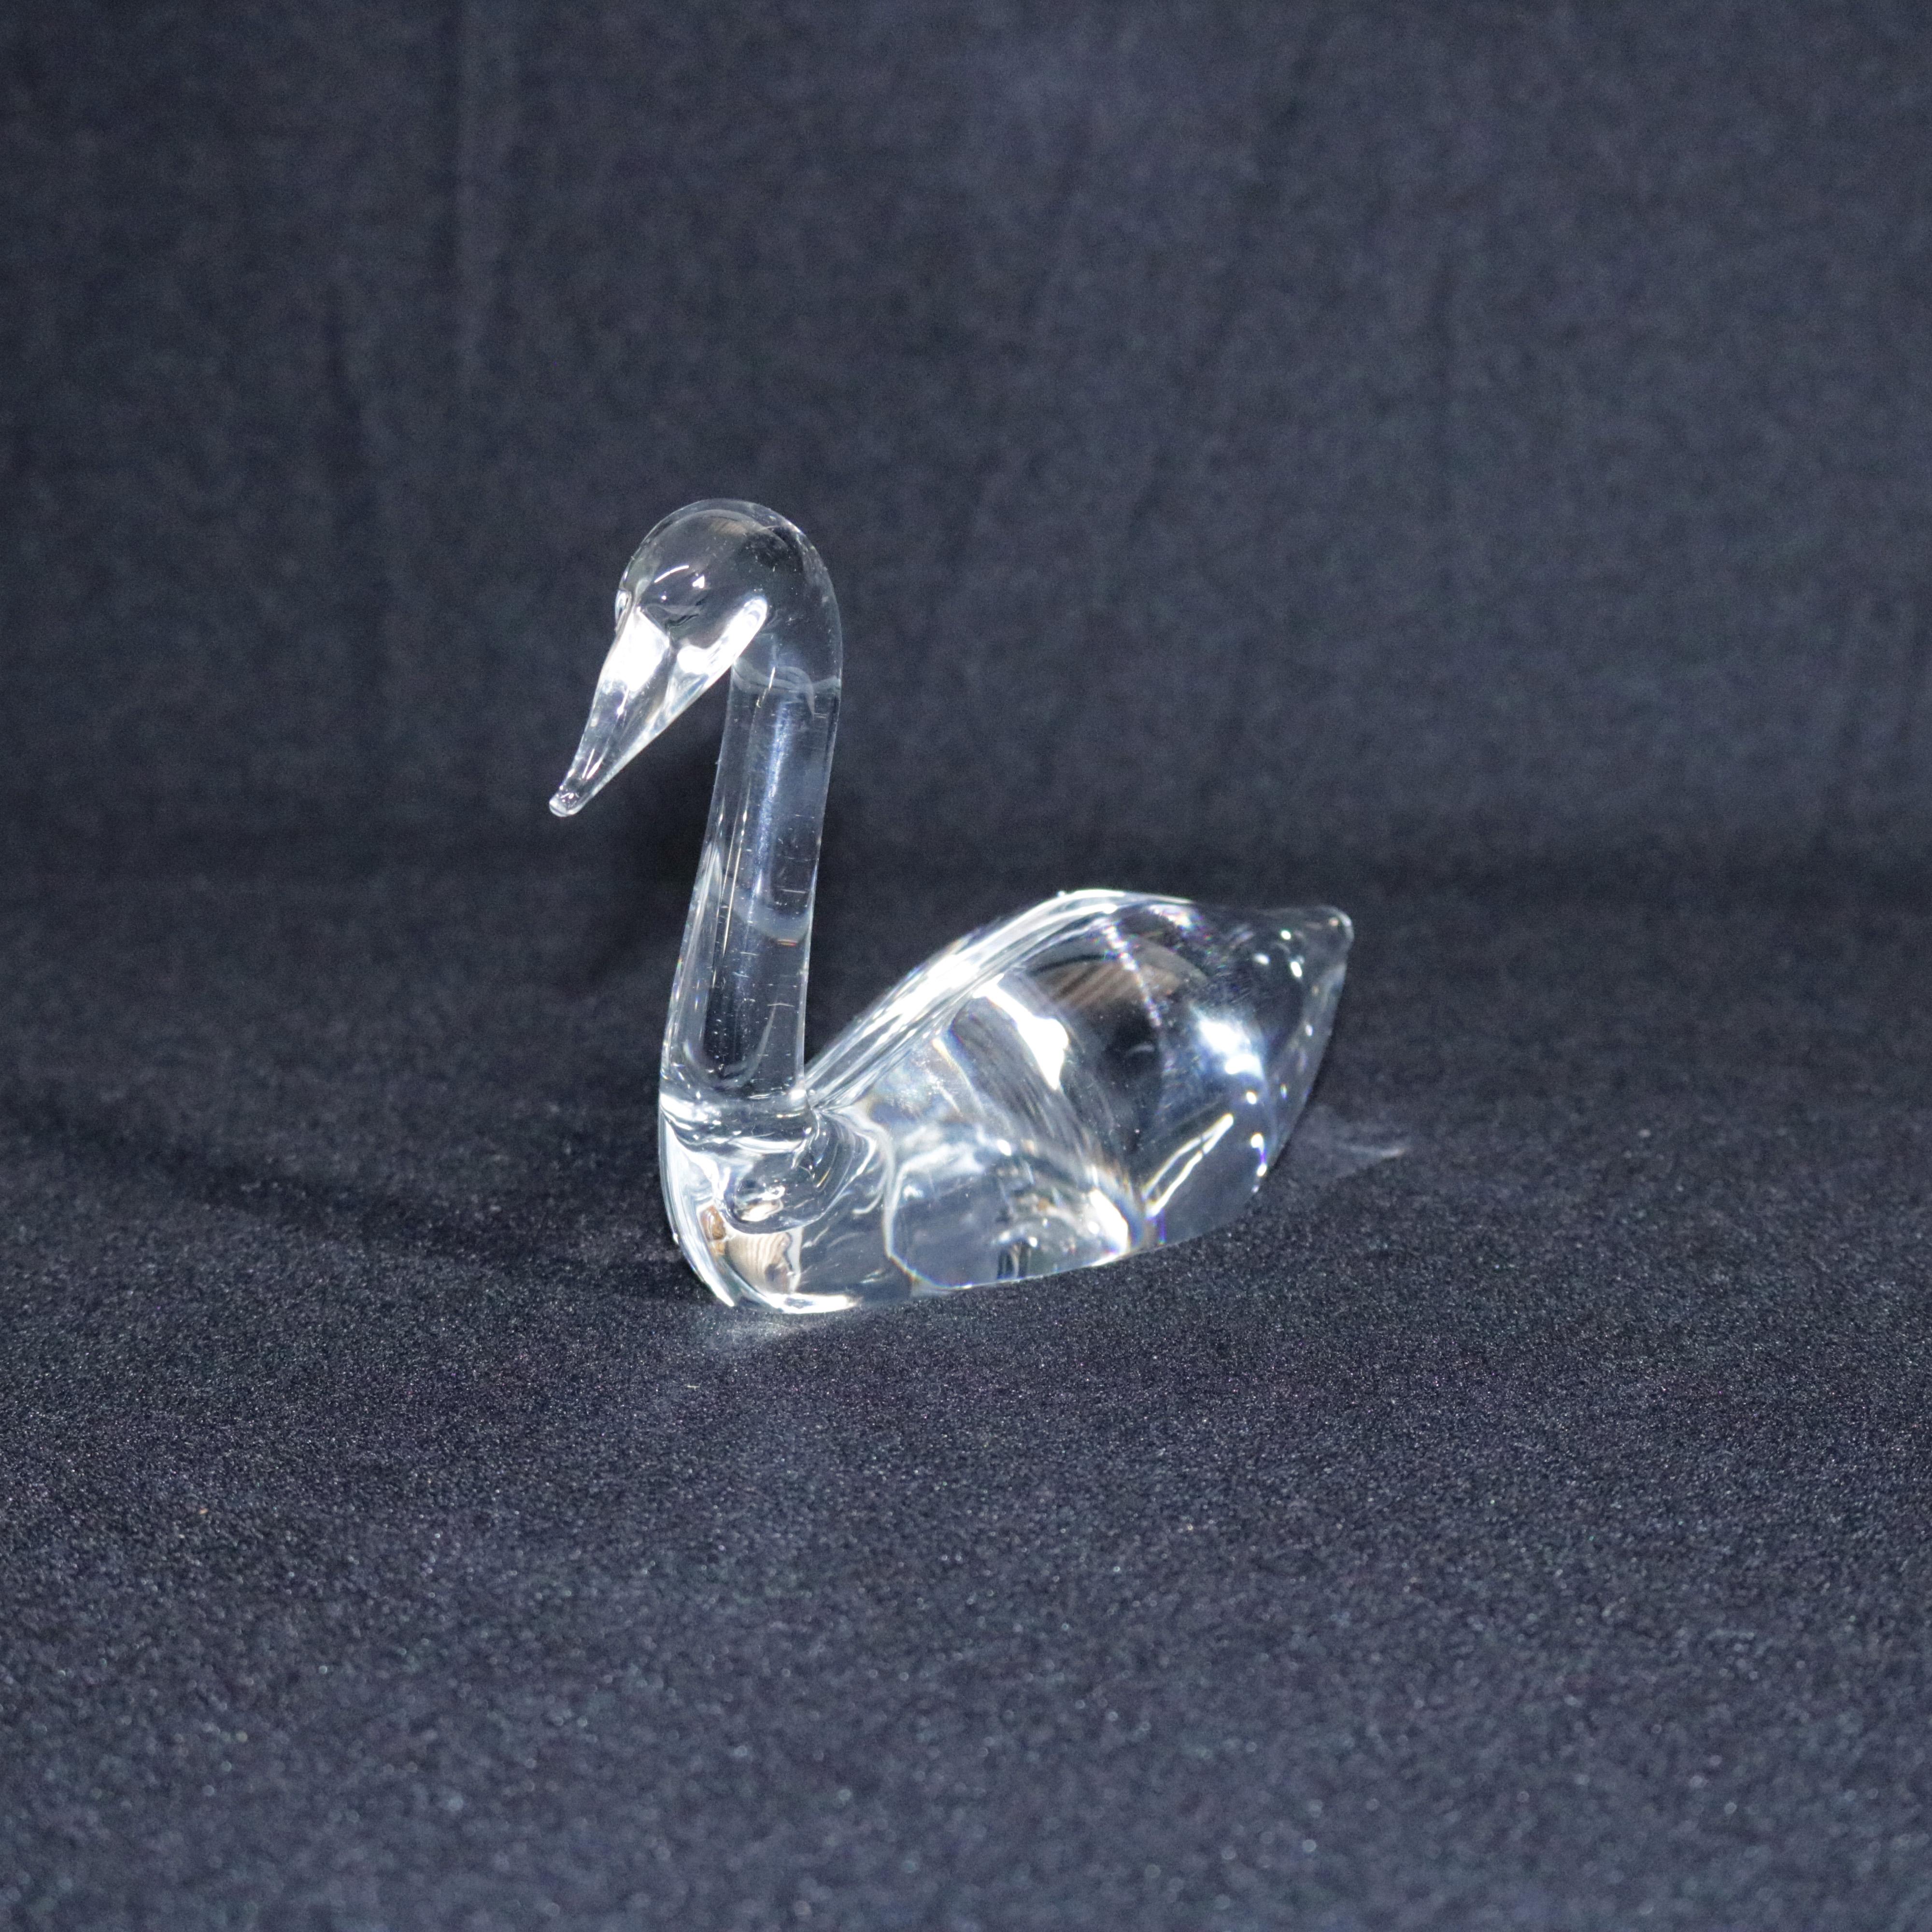 American Steuben Crystal Sculpture Paperweight of Swan by Lloyd Atkins, Signed